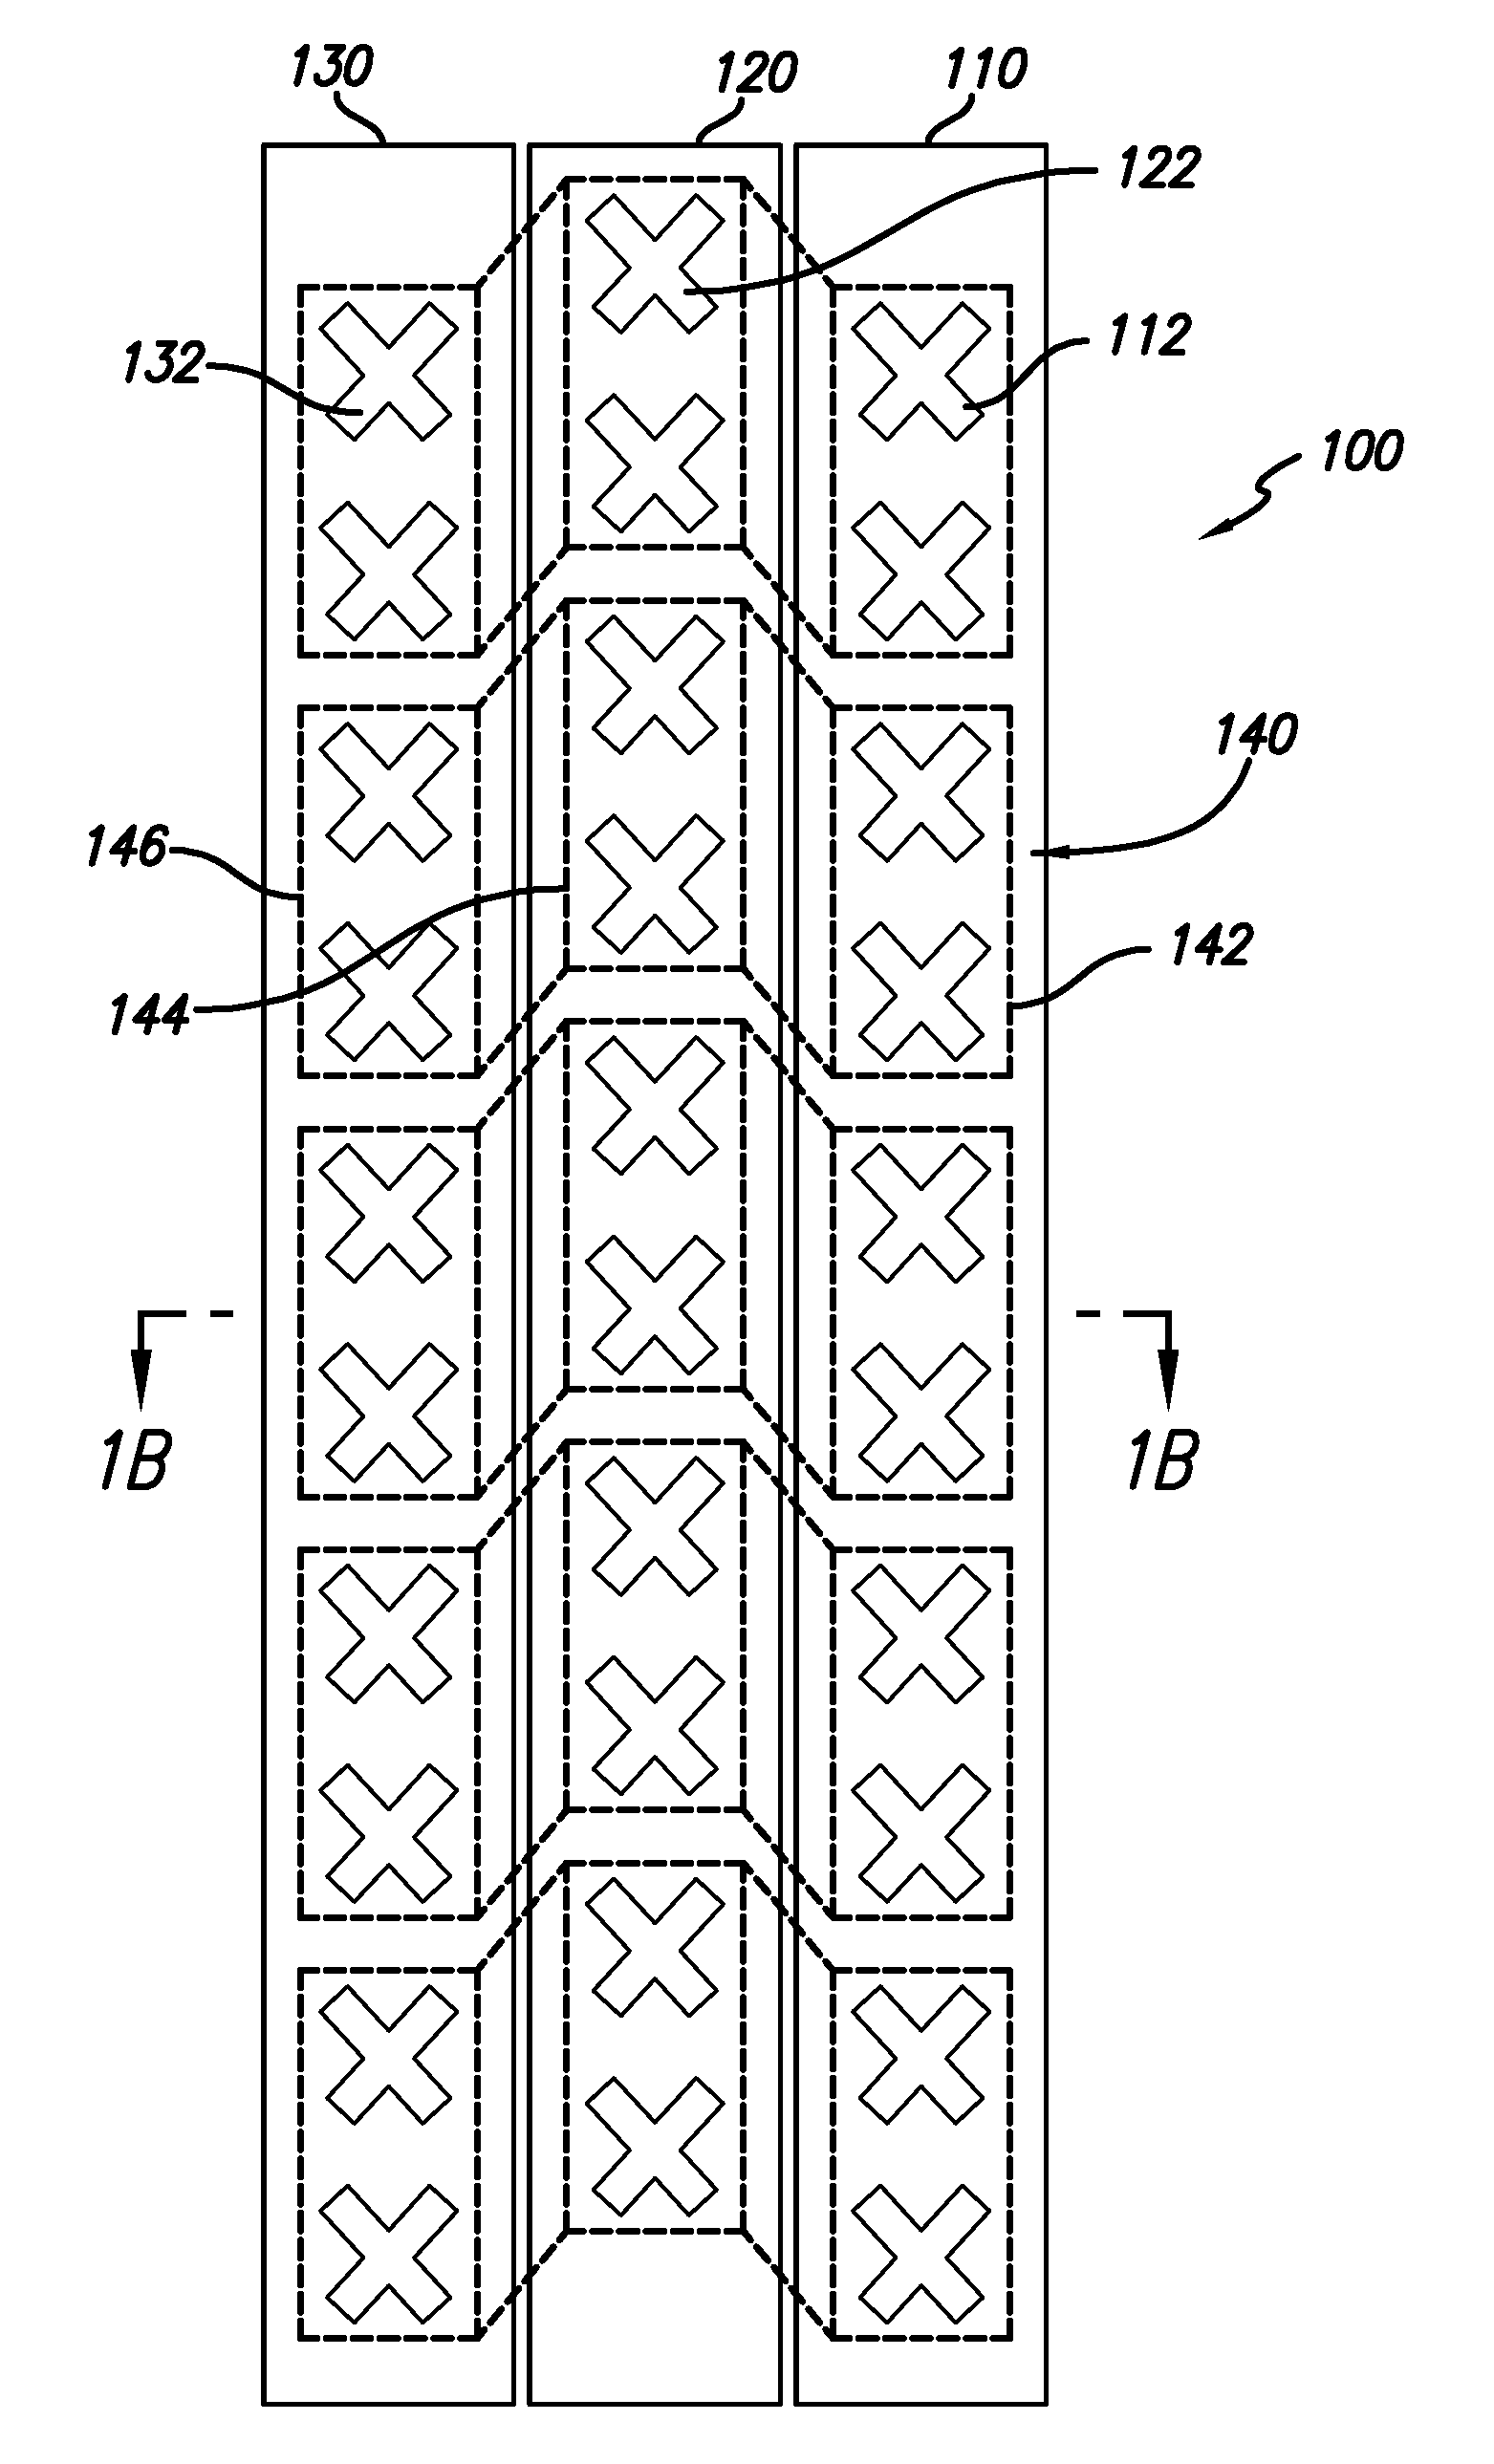 Dual beam sector antenna array with low loss beam forming network